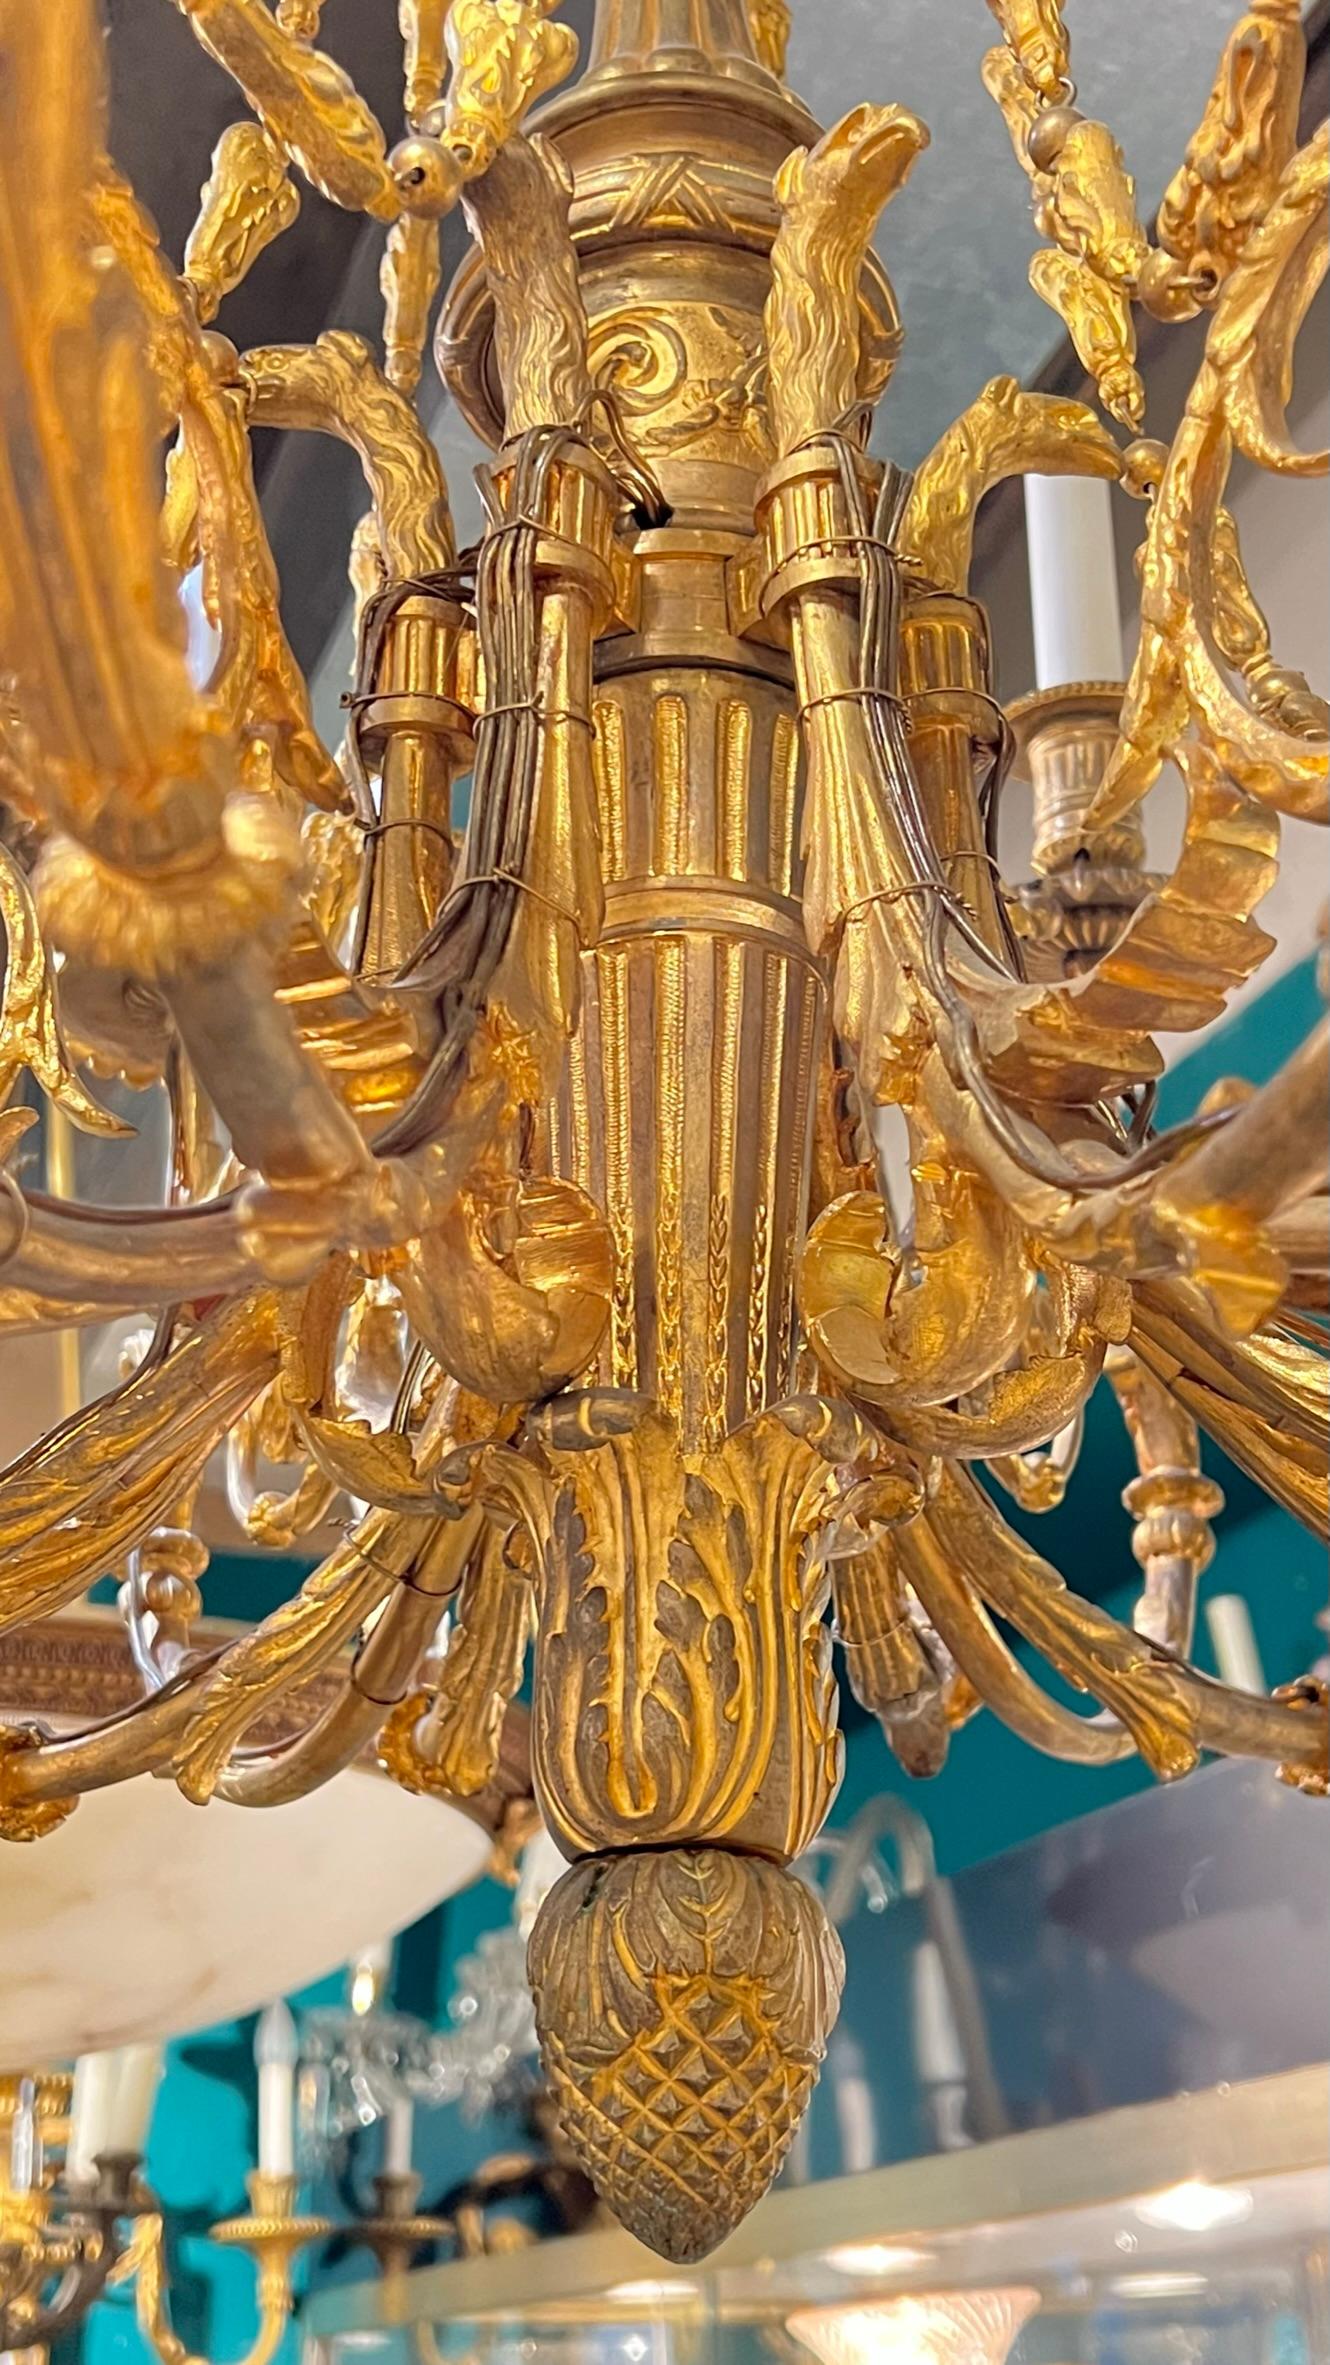 French 19th Century 18-Light Gilt Bronze Chandelier in Louis XVI Style For Sale 8